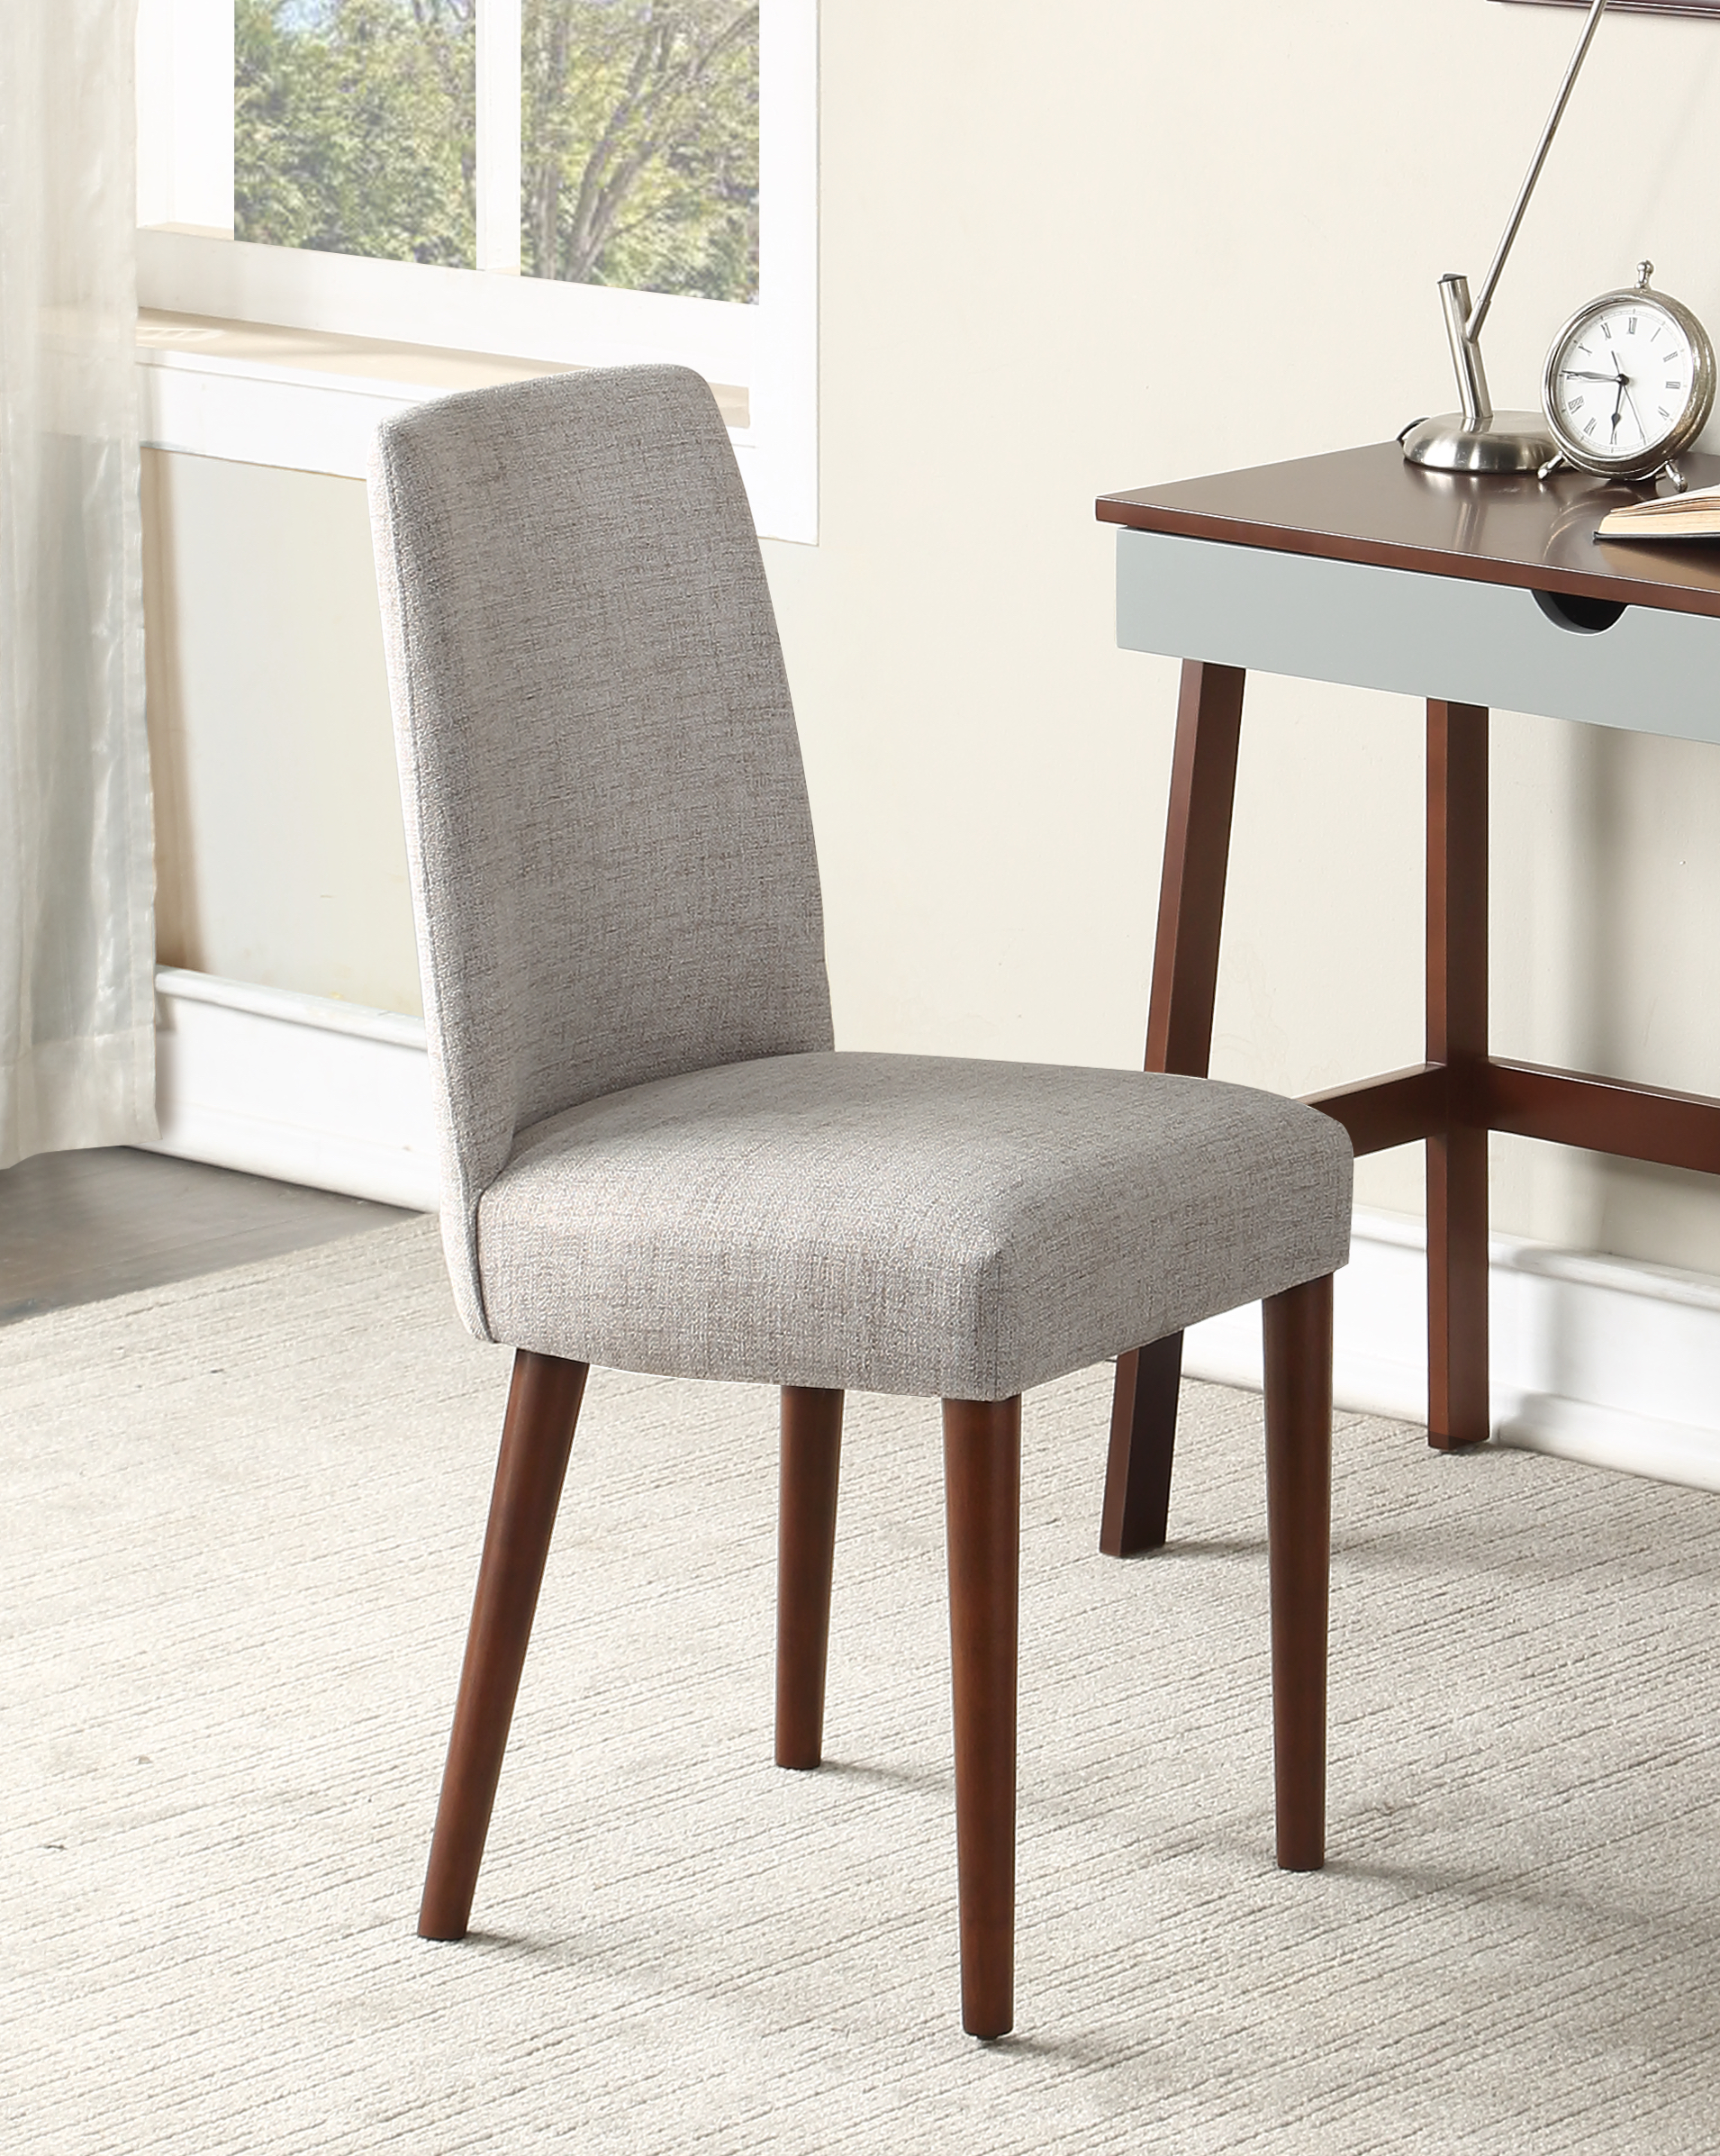 Taylor Chair With Espresso Legs And Gray Fabric-Boyel Living